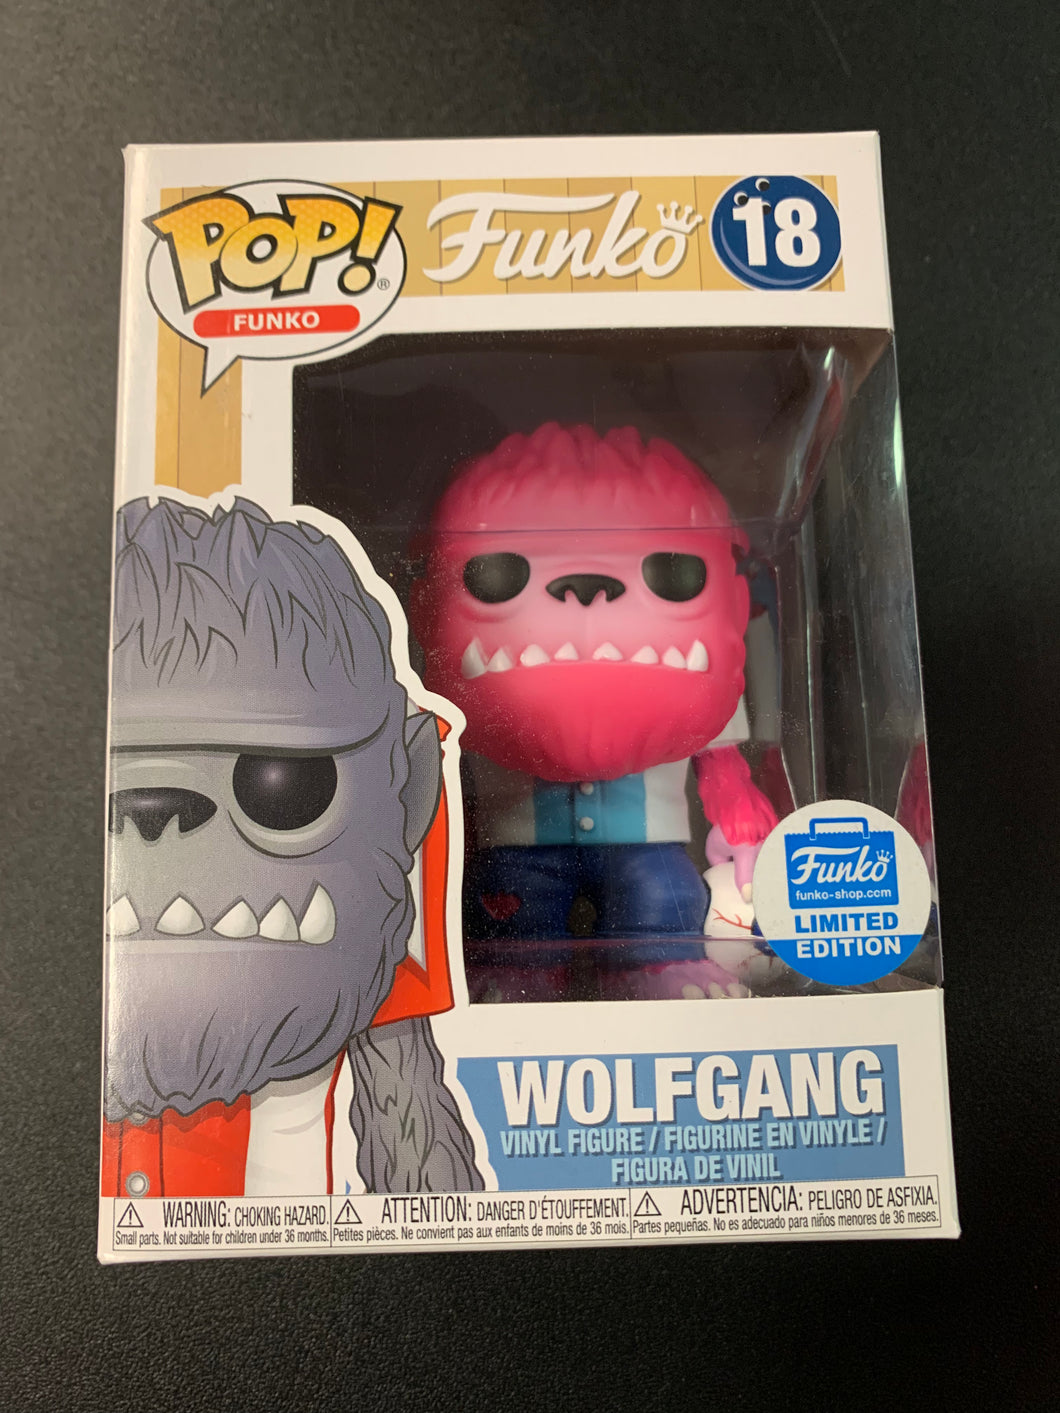 FUNKO POP WOLFGANG LIMITED EDITION 18